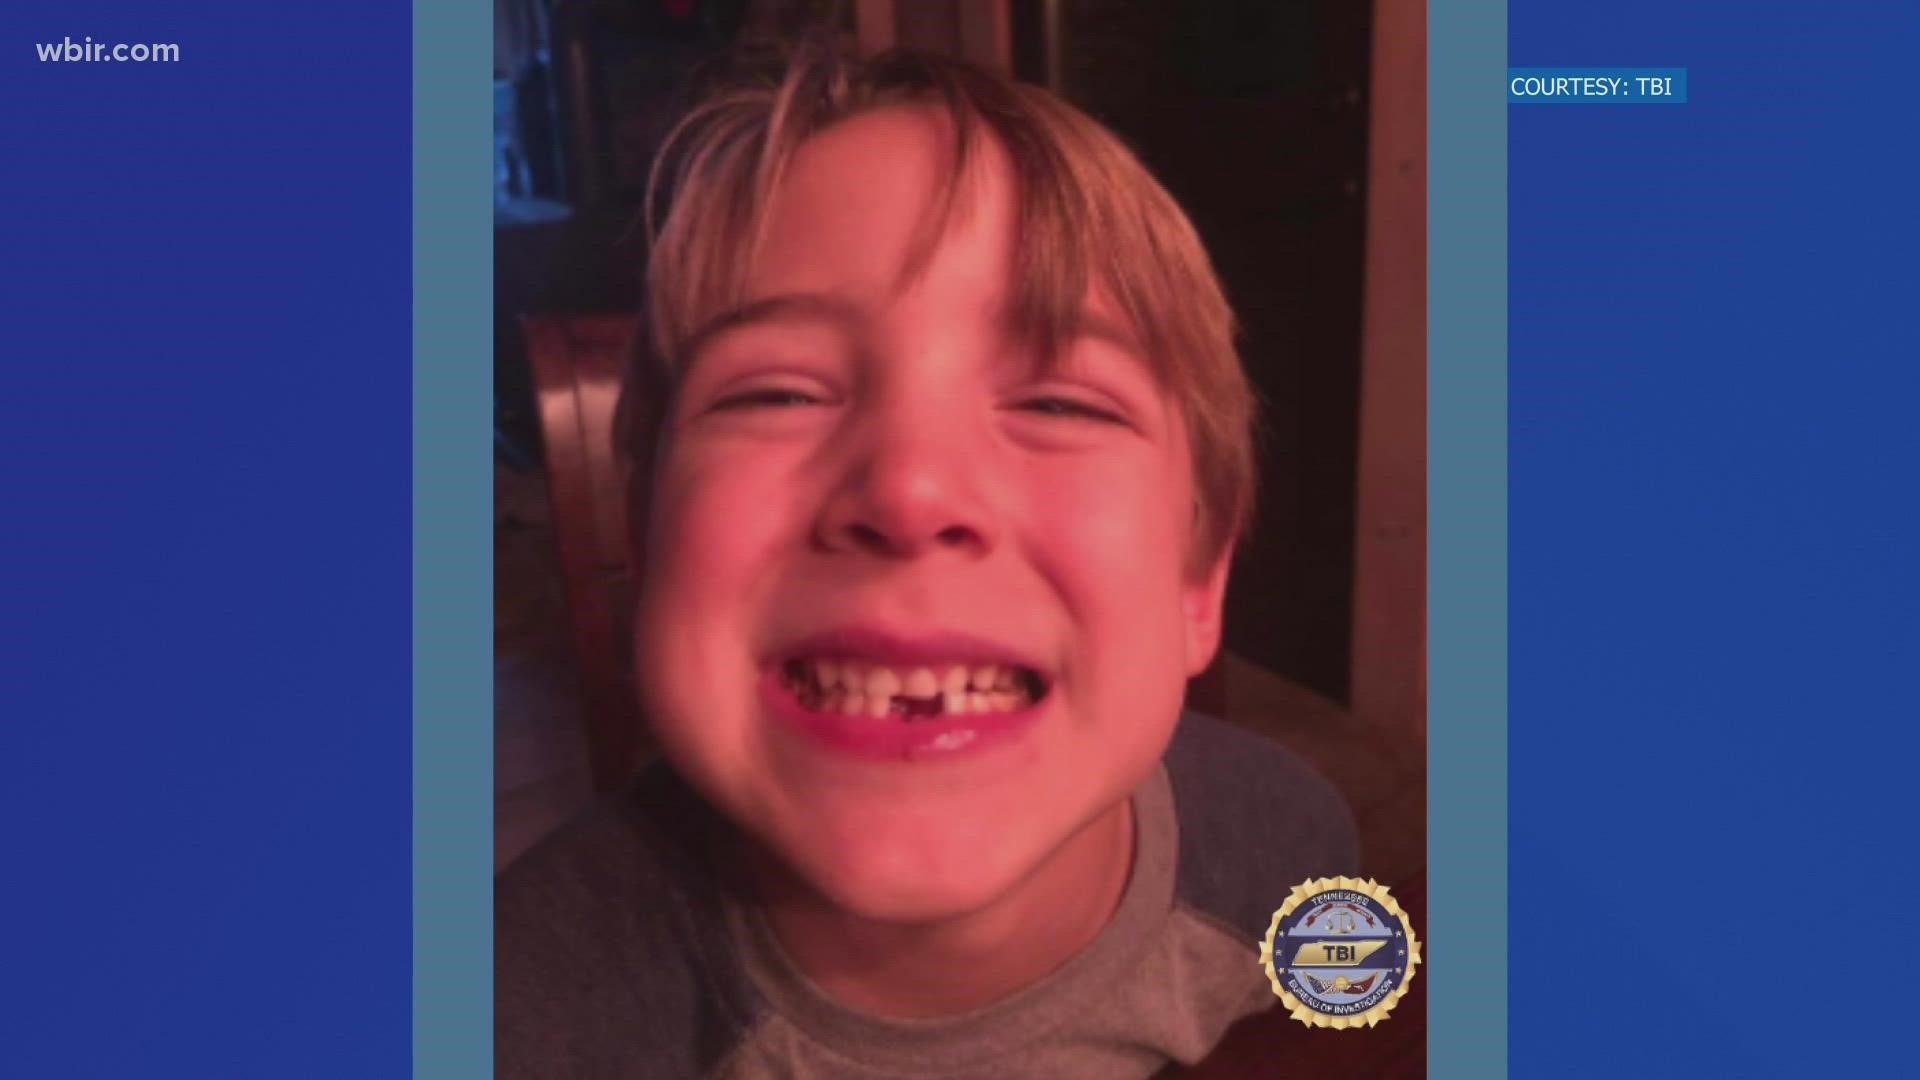 Authorities say that six-year-old Elijah Kesinger went missing from Tellico Plains Thursday afternoon.